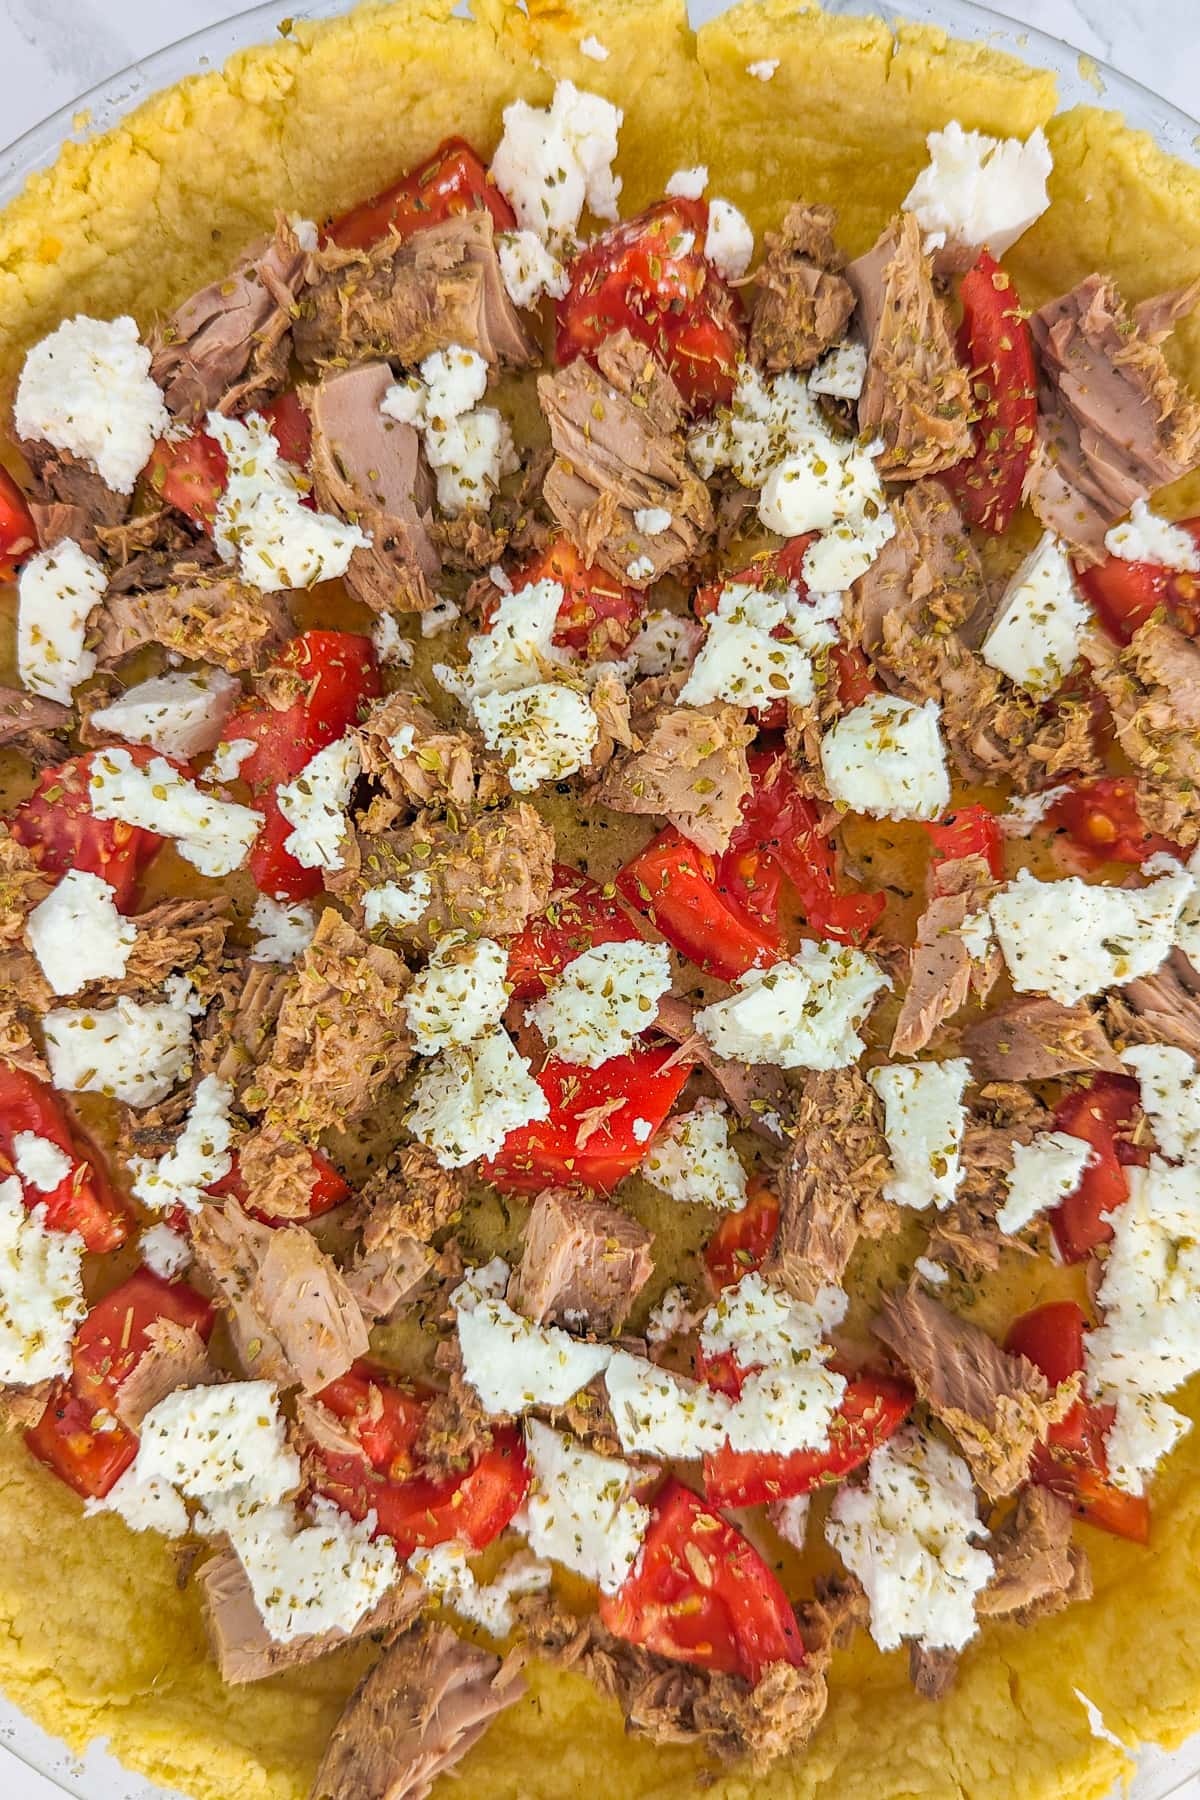 Pieces of tuna, tomatoes and feta cheese arranged on a sheet of baked dough.